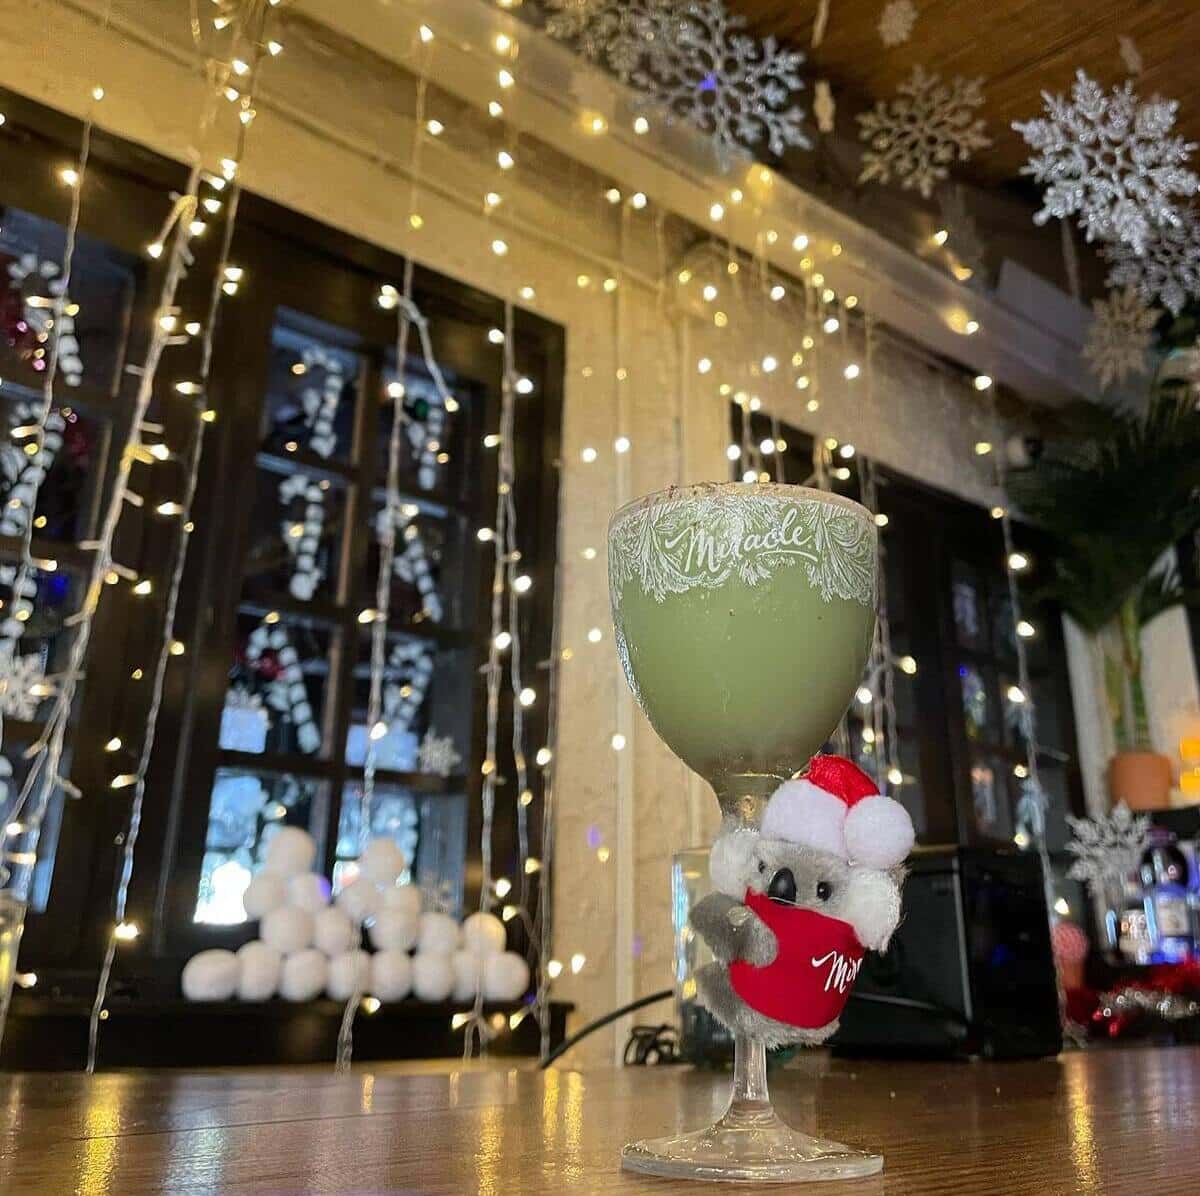 Koala attached to a drink at The Falcon holiday pop-up bar